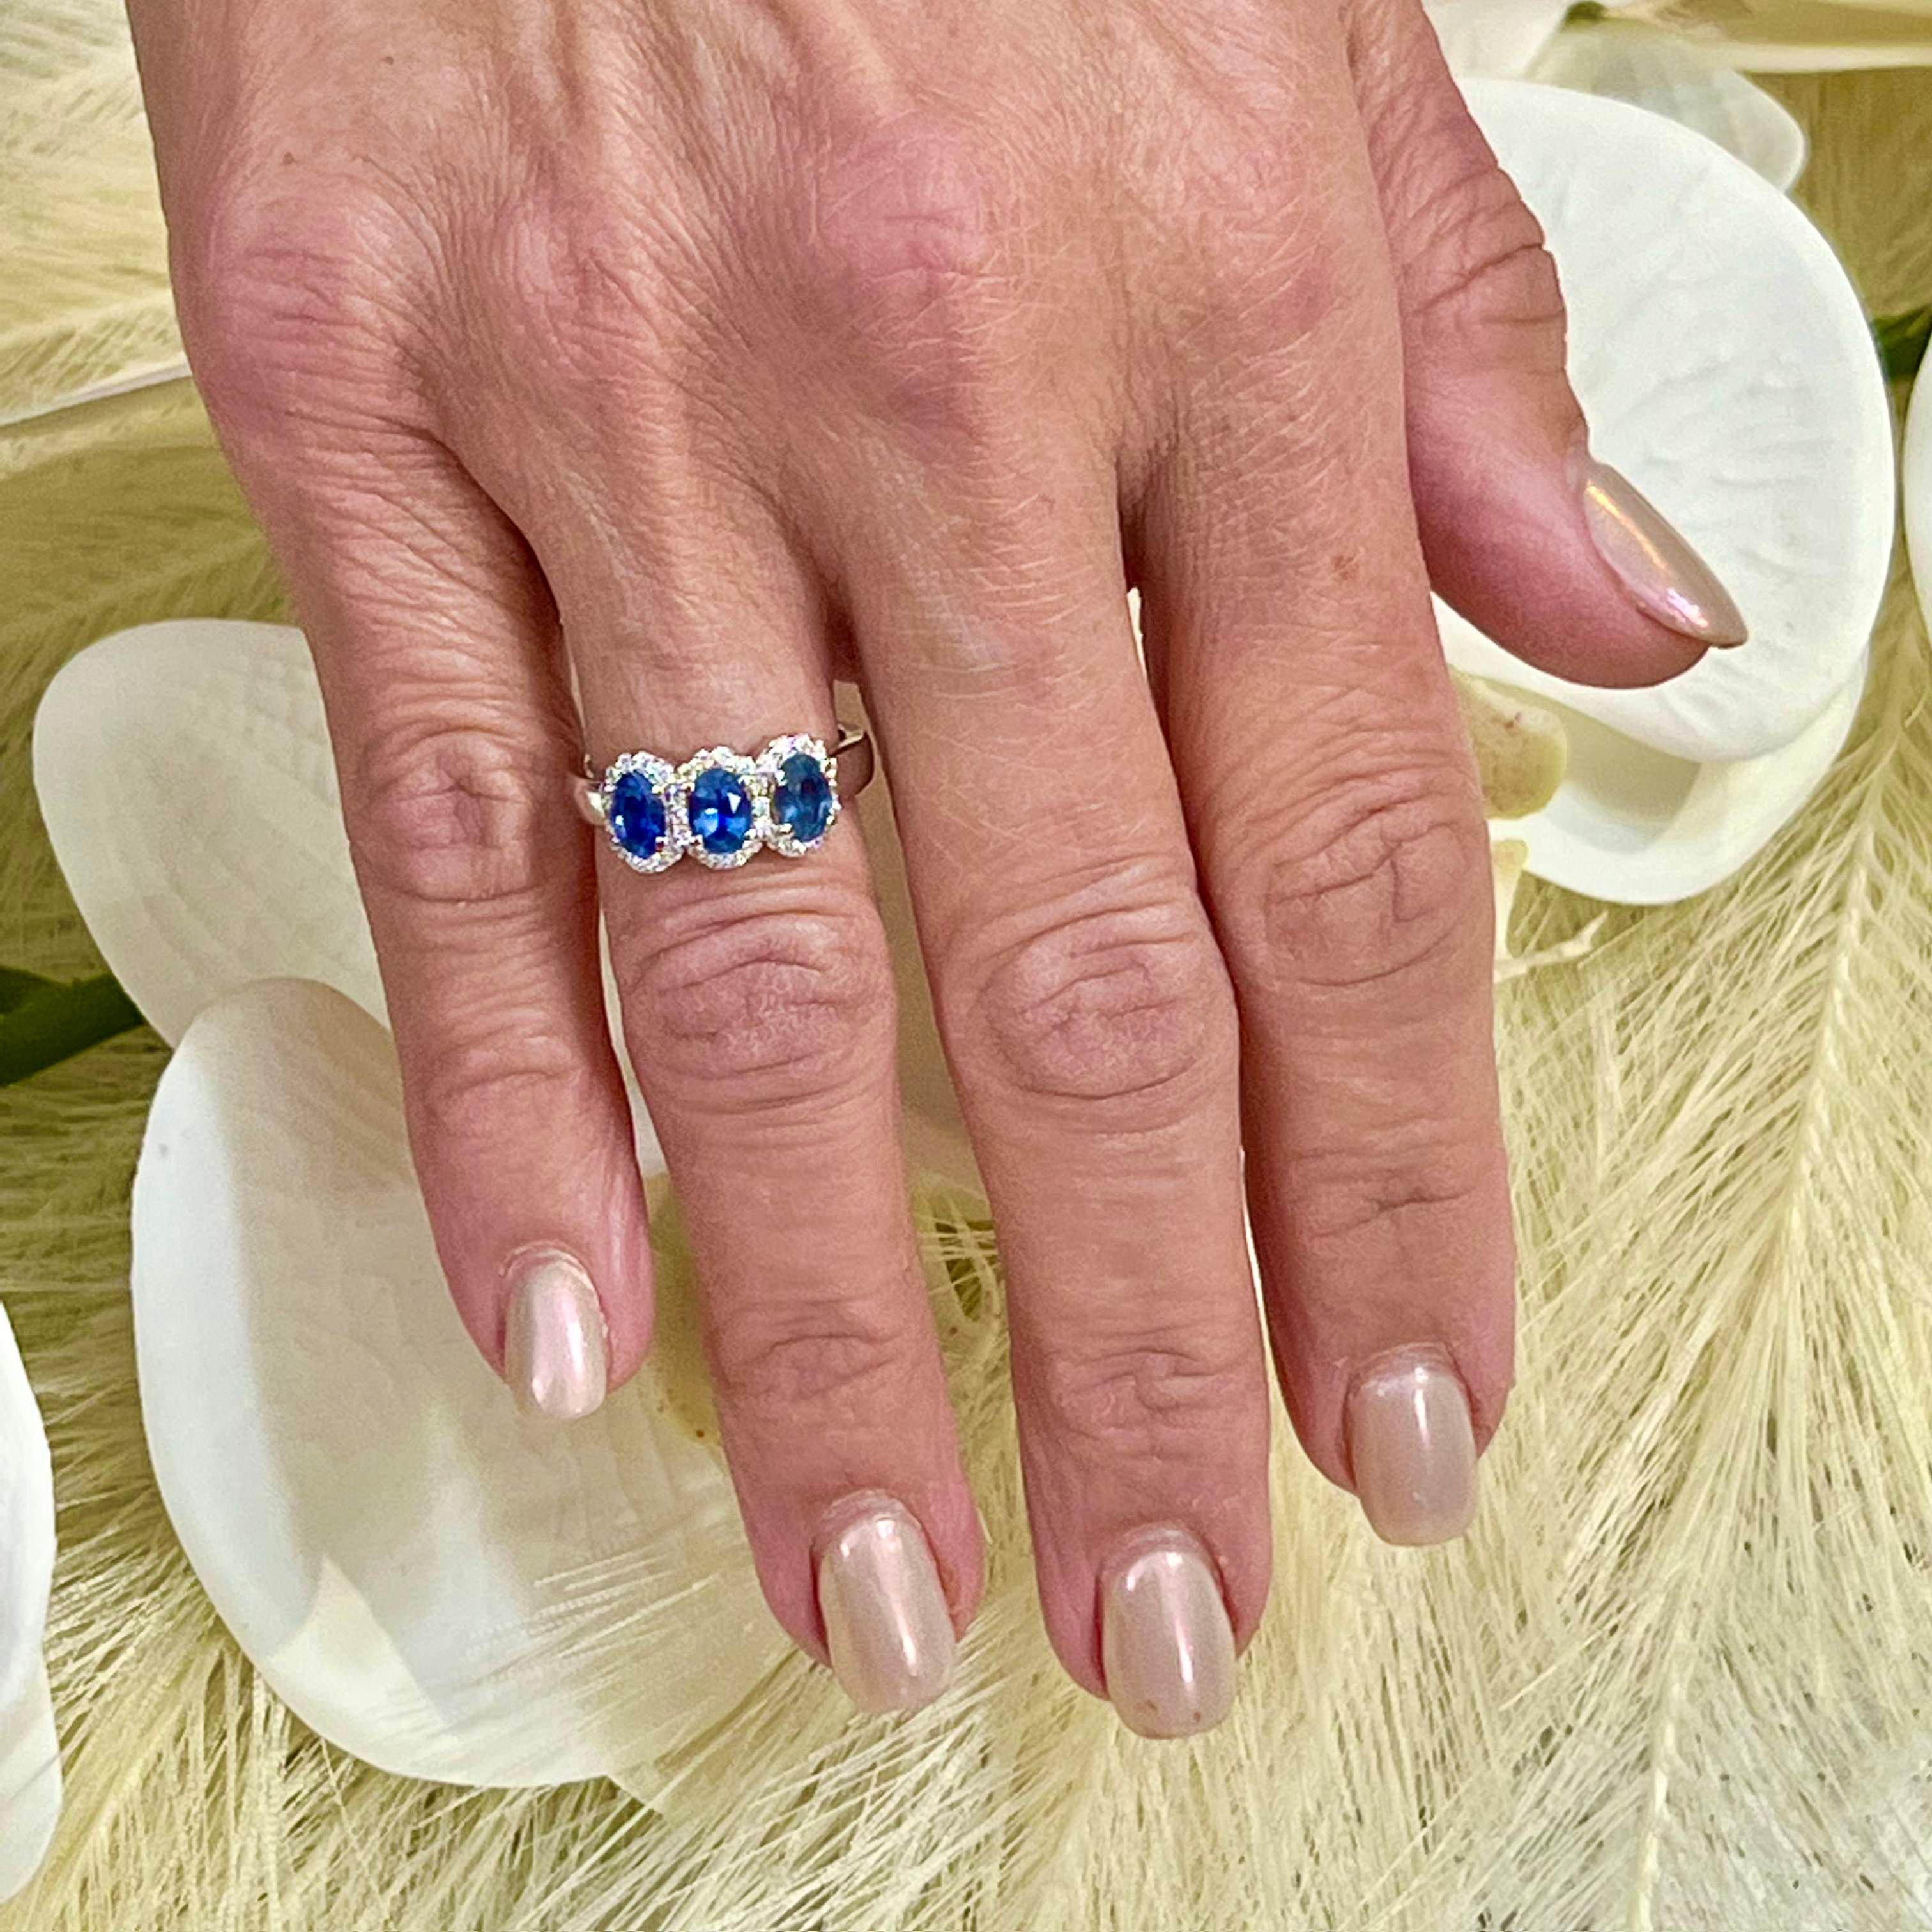 Natural Finely Faceted Quality Natural Sapphire Diamond Ring 7 14k W Gold 1.67 TCW Certified $4,975 218113

This is a Unique Custom Made Glamorous Piece of Jewelry!

Nothing says, “I Love you” more than Diamonds and Pearls!

This Sapphire ring has